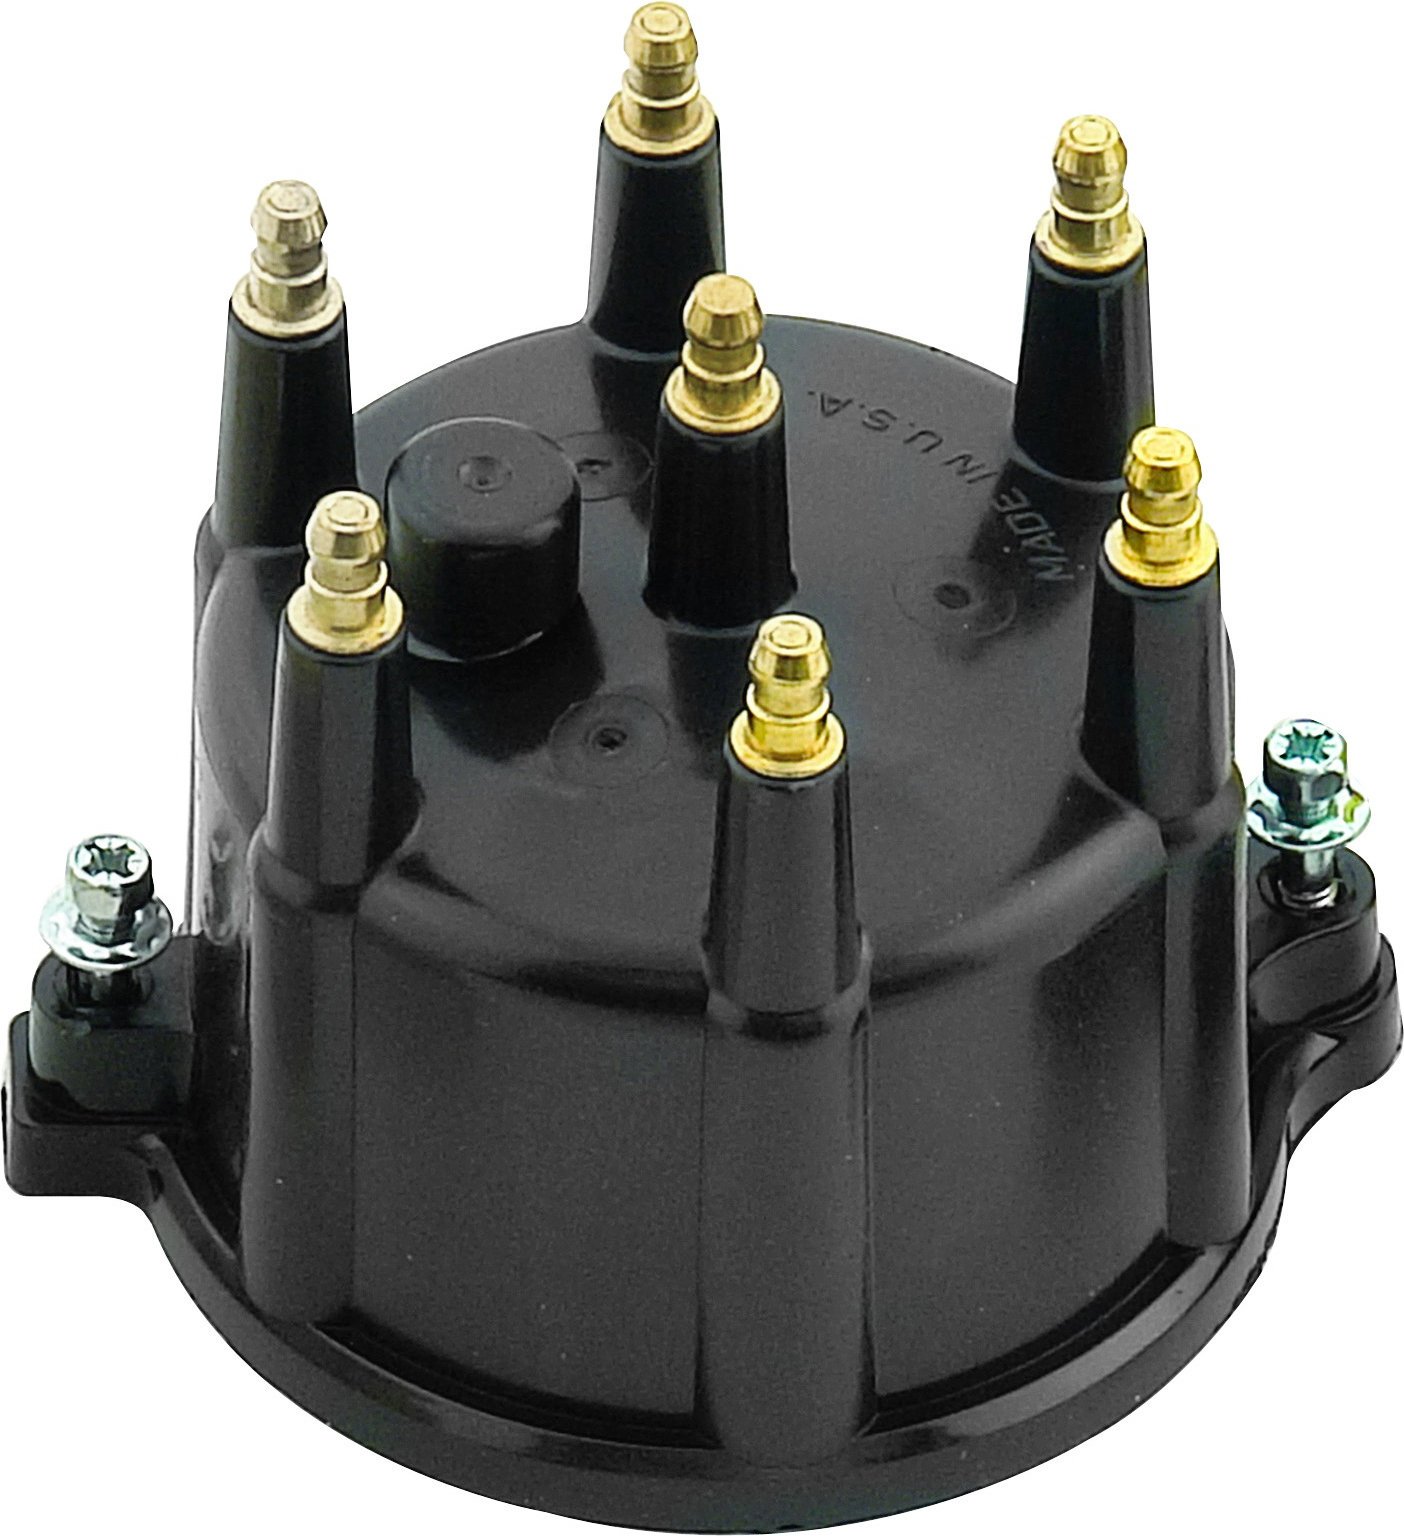 Accel 120330 Distributor Cap in Black for 97-99 Jeep Wrangler TJ with   Engine | Quadratec